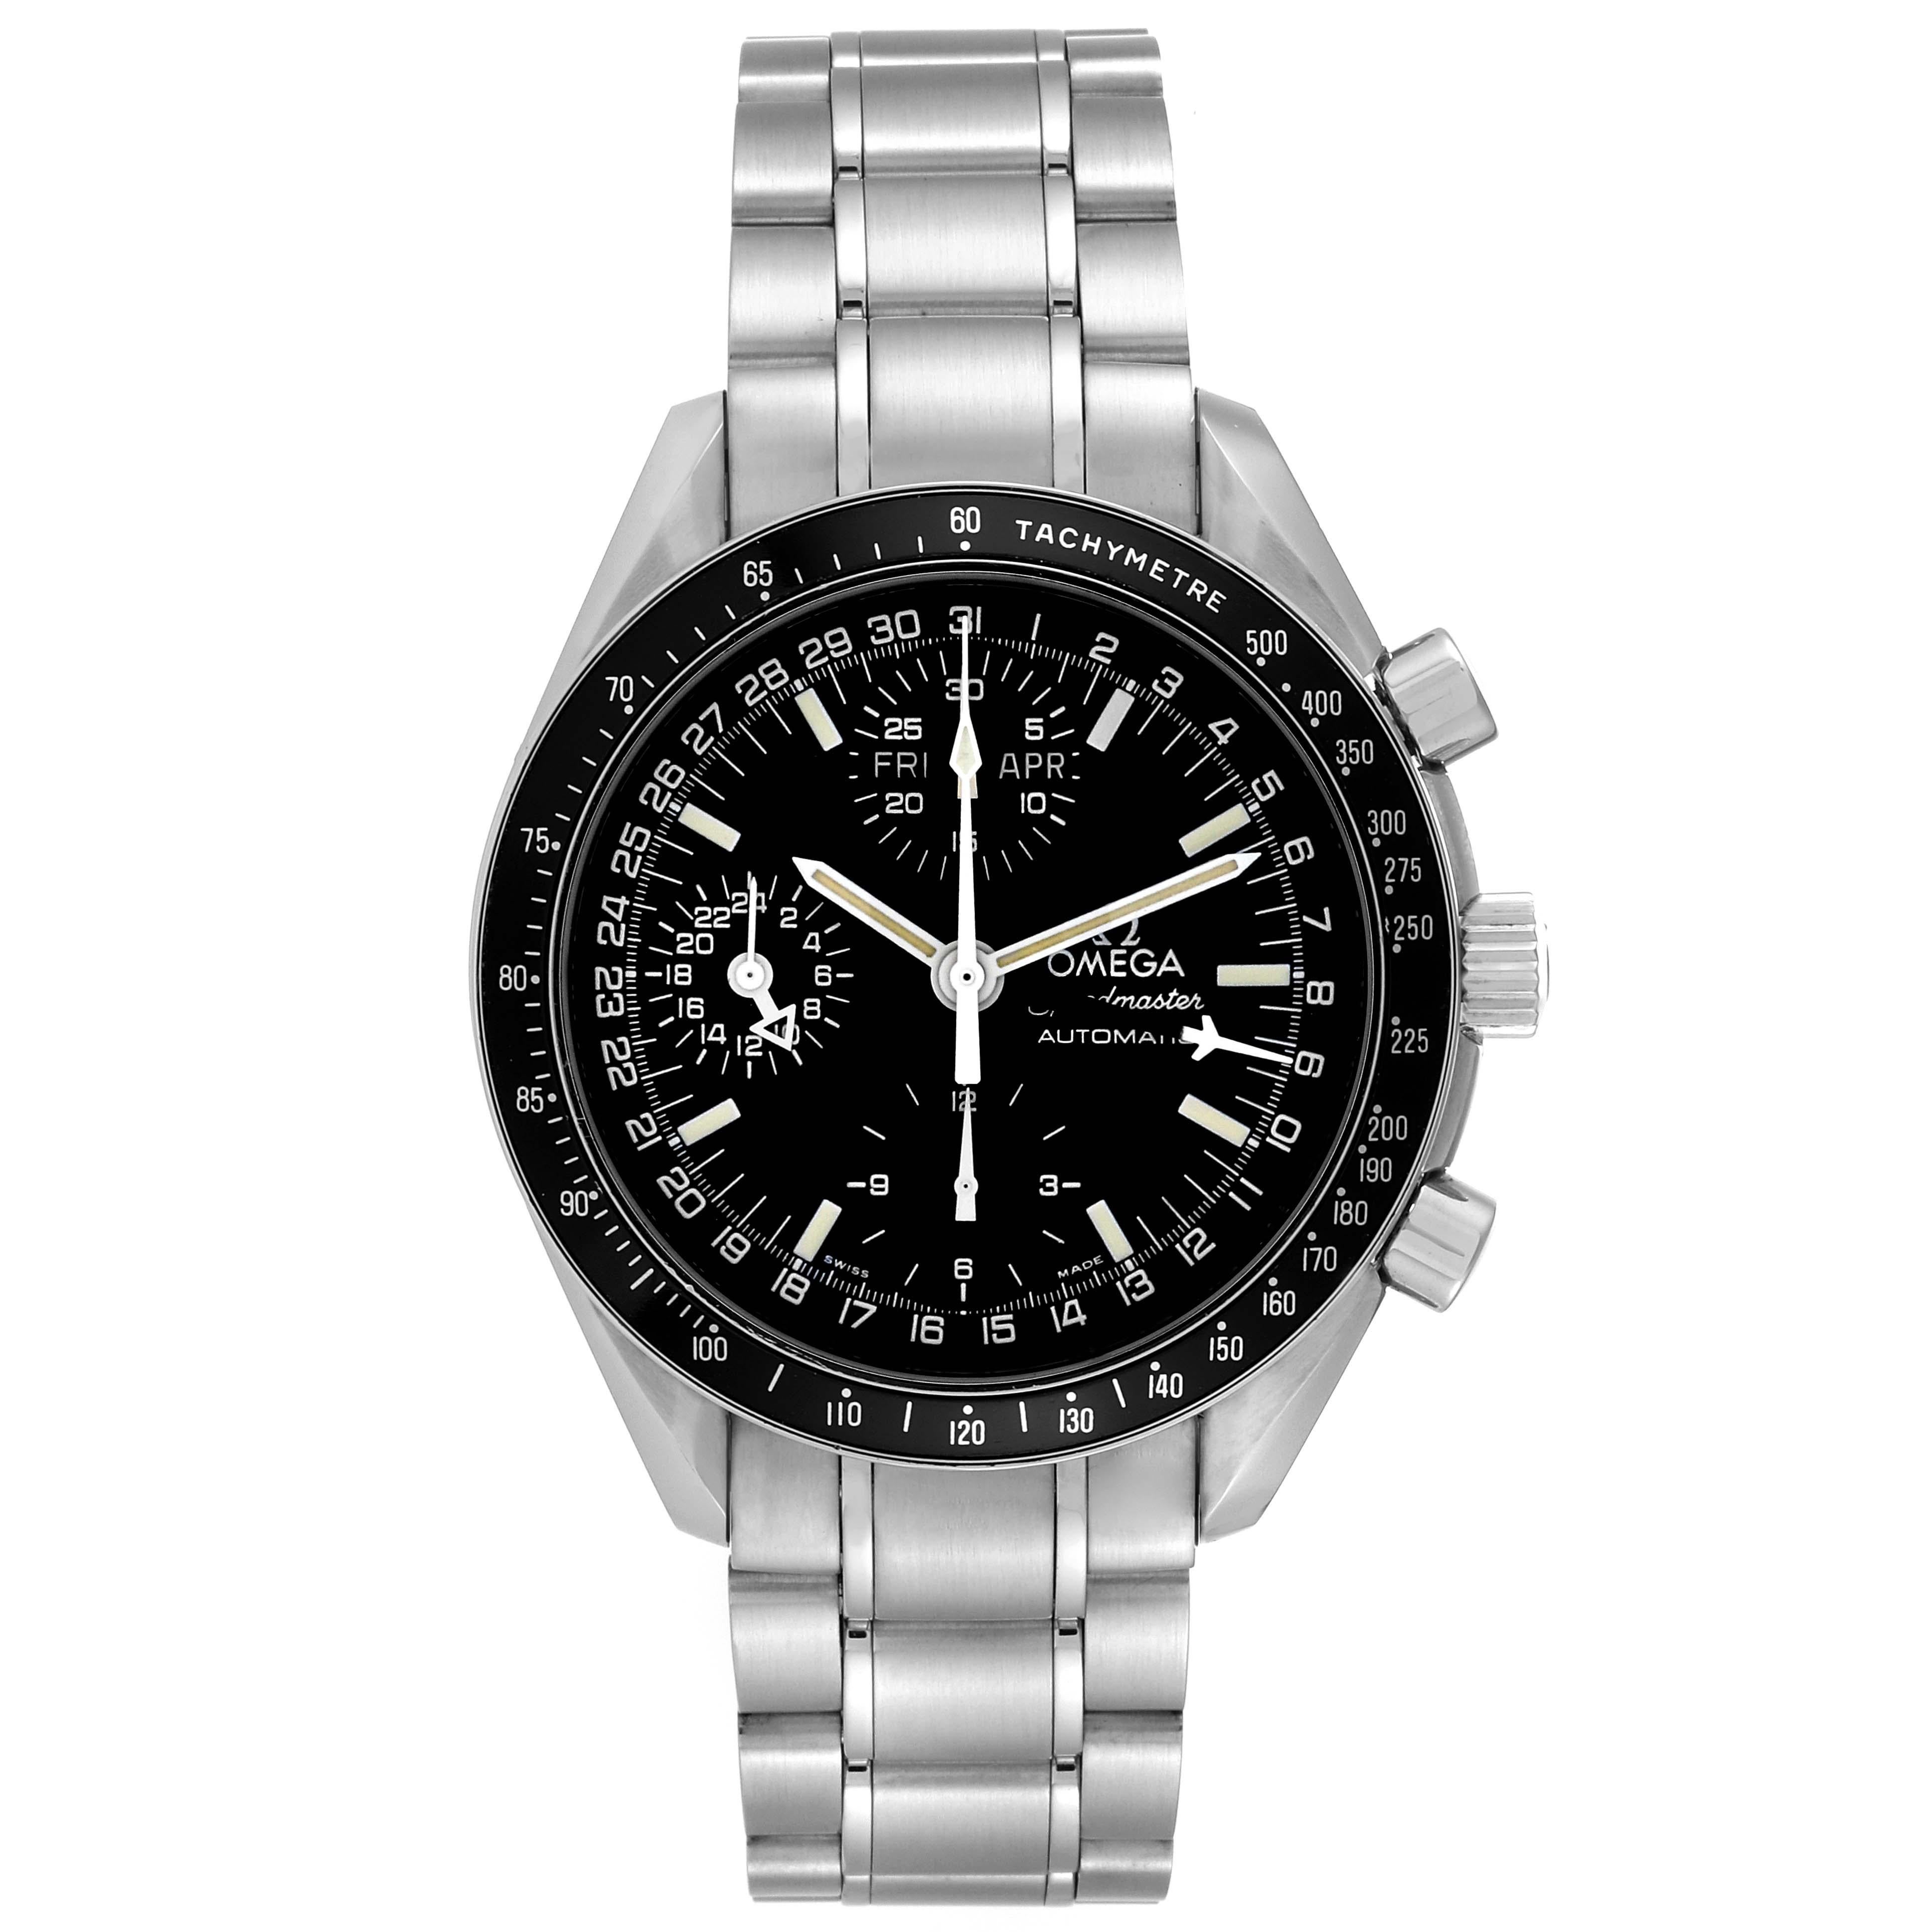 Omega Speedmaster Day Date Black Dial Automatic Mens Watch 3520.50.00 Box Card. Automatic self-winding movement. Stainless steel round case 39.0 mm in diameter. Stainless steel bezel with black tachymeter insert. Anti-reflective scratch resistant